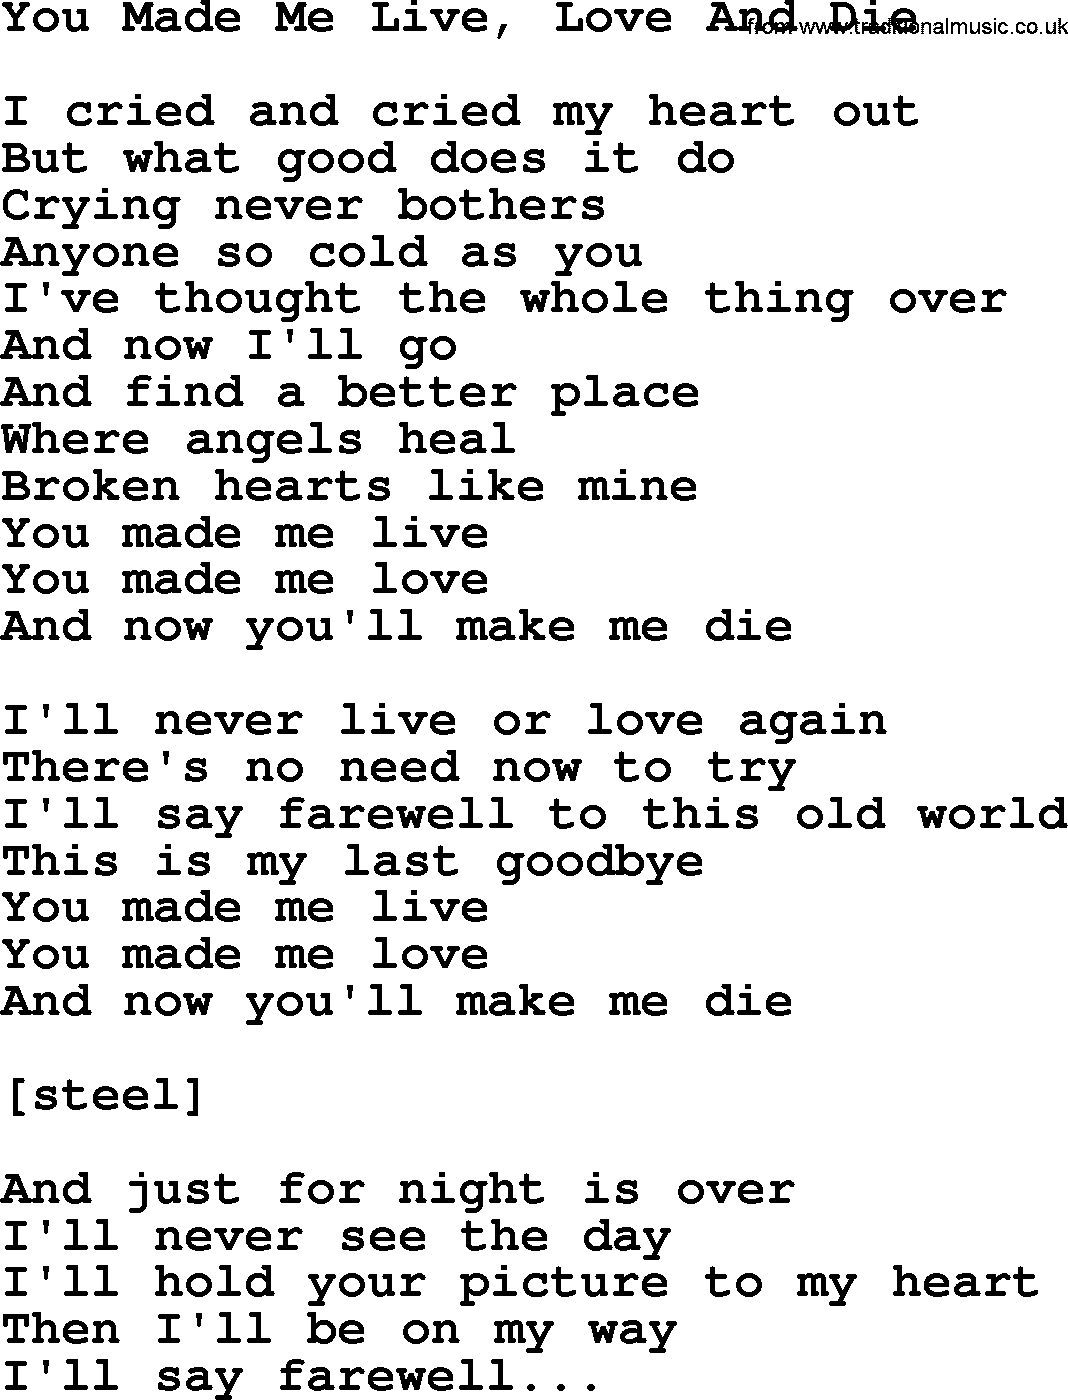 Willie Nelson song: You Made Me Live, Love And Die lyrics